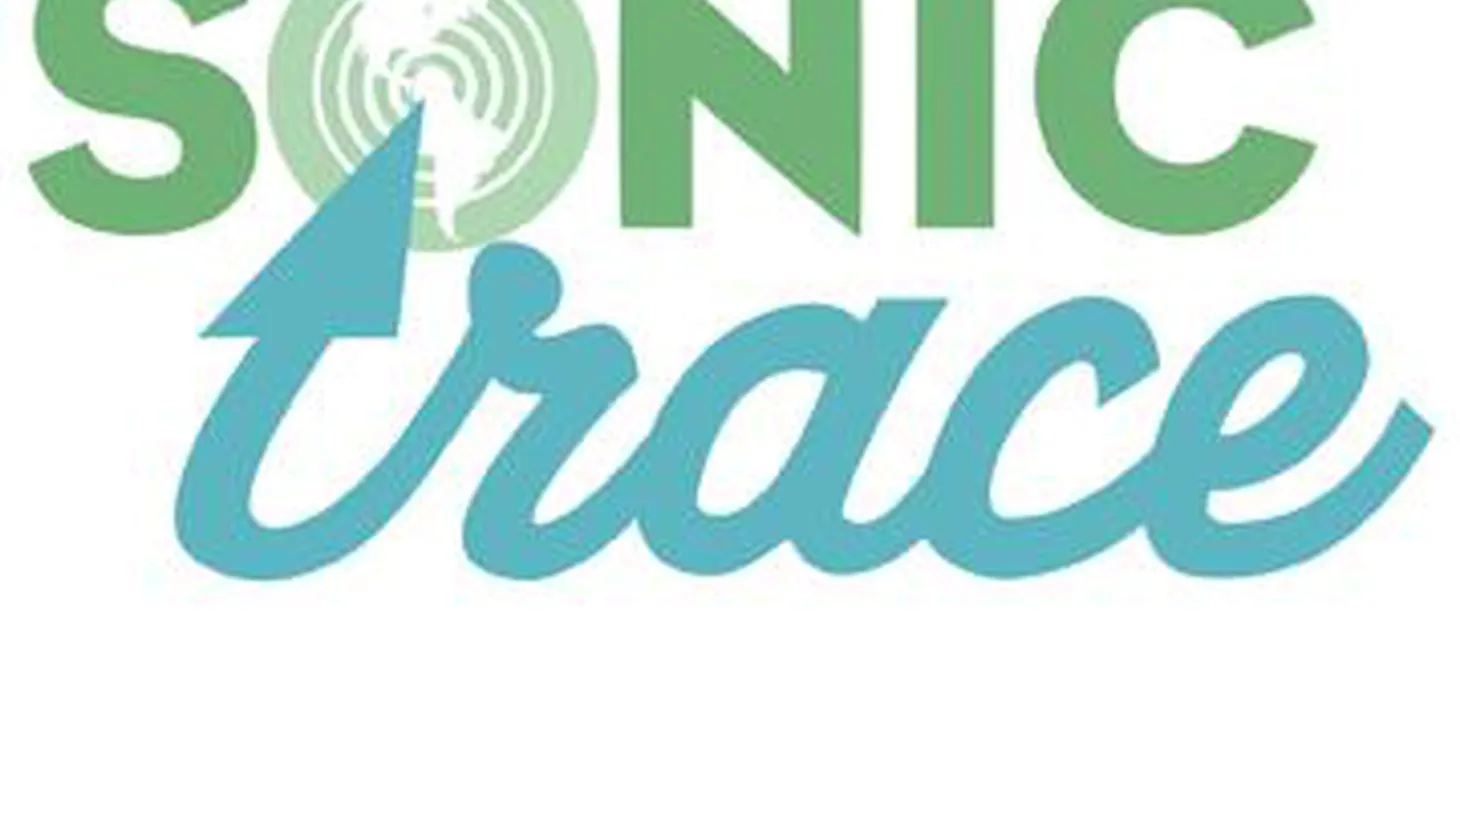 Sonic Trace is a new story-telling project that begins in the heart of Los Angeles and crosses into Mexico, El Salvador, Guatemala and Honduras.